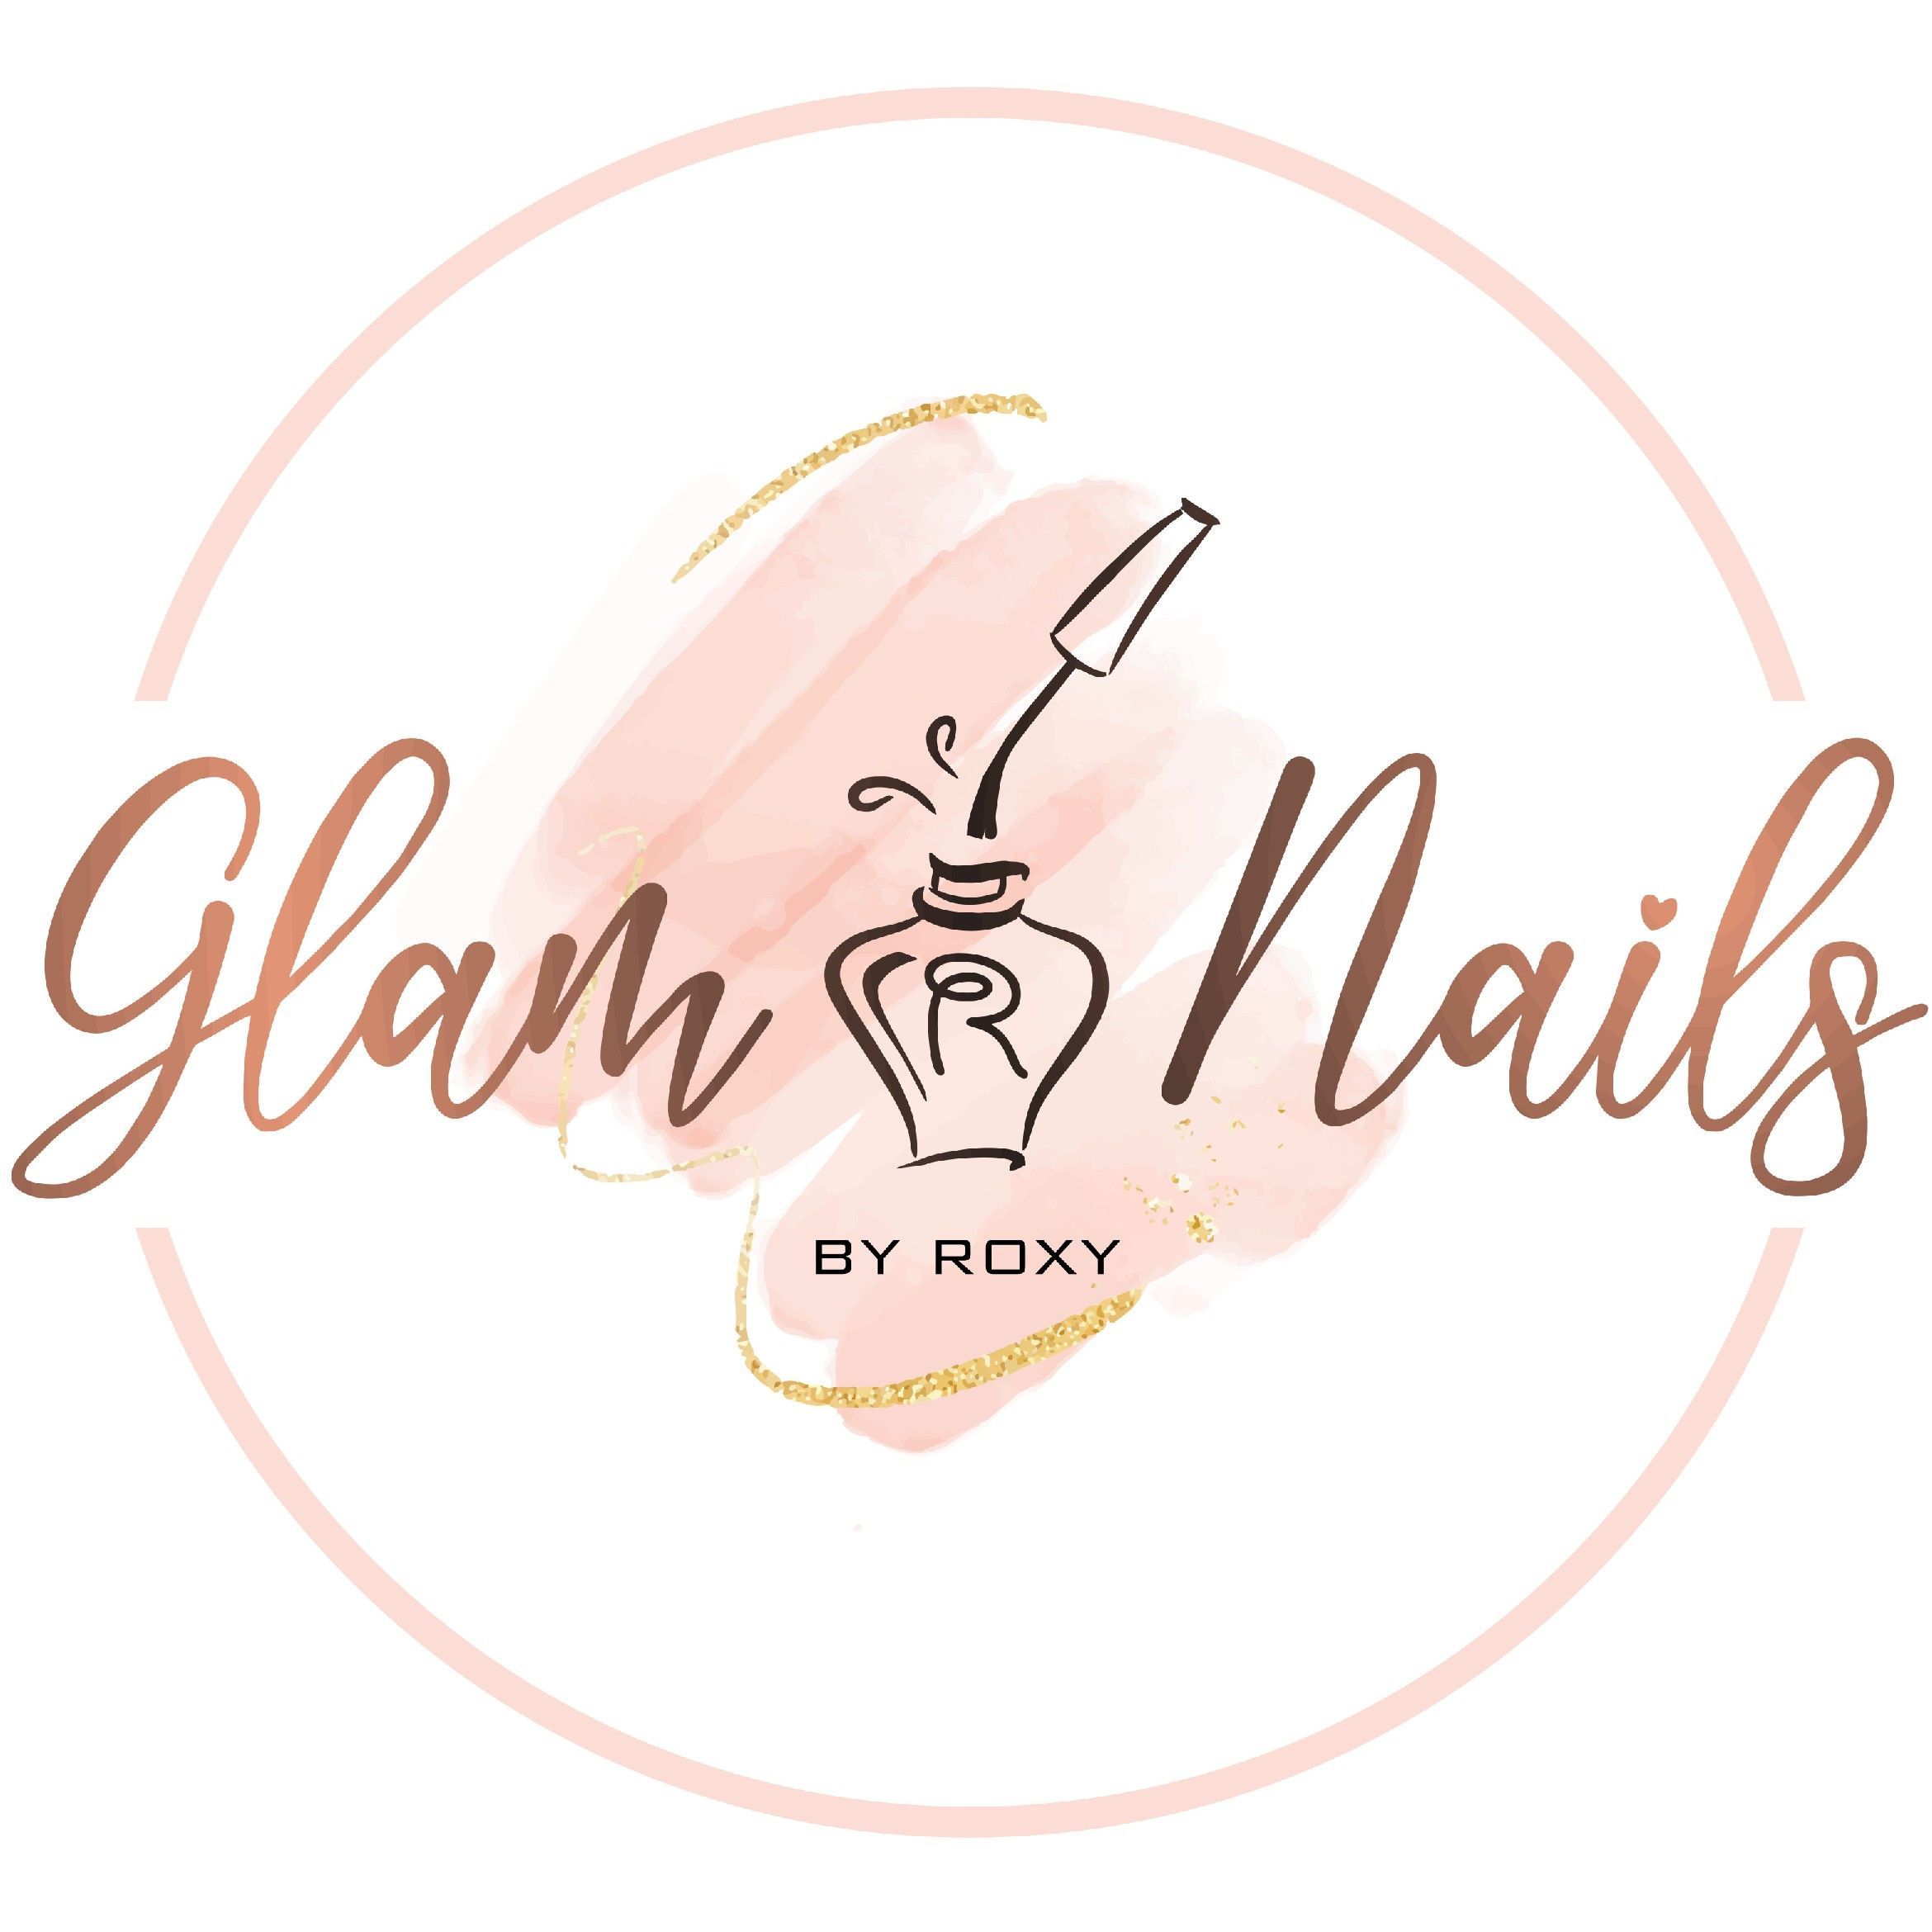 Glam Nails by Roxy, 19 Heol Stradling - Please come around the back. Parking available., CF35 6AN, Bridgend